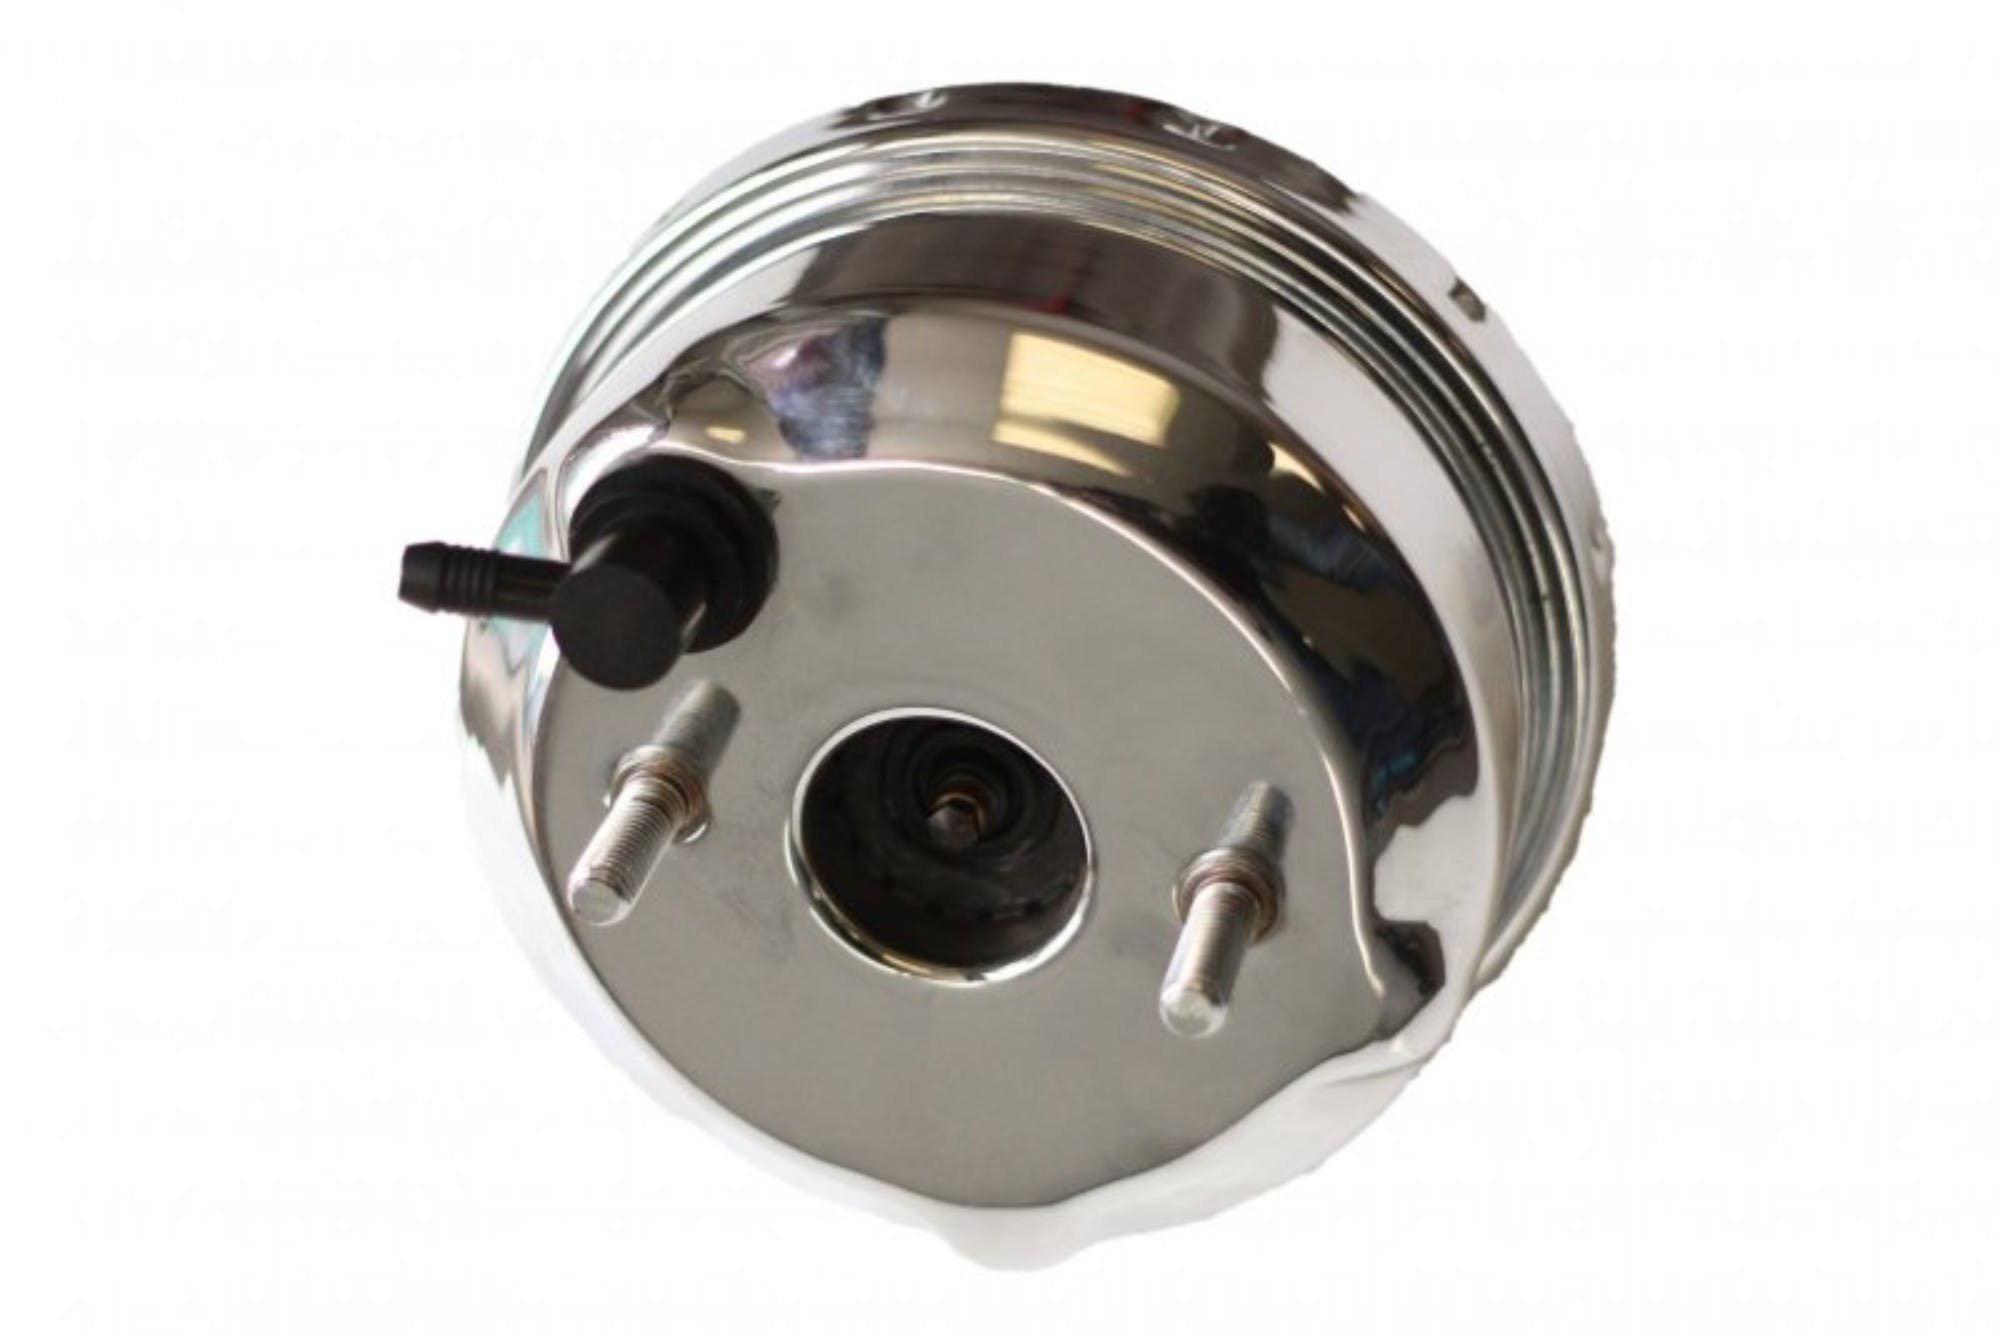 LEED Brakes PB05 7 in Booster (Chrome)